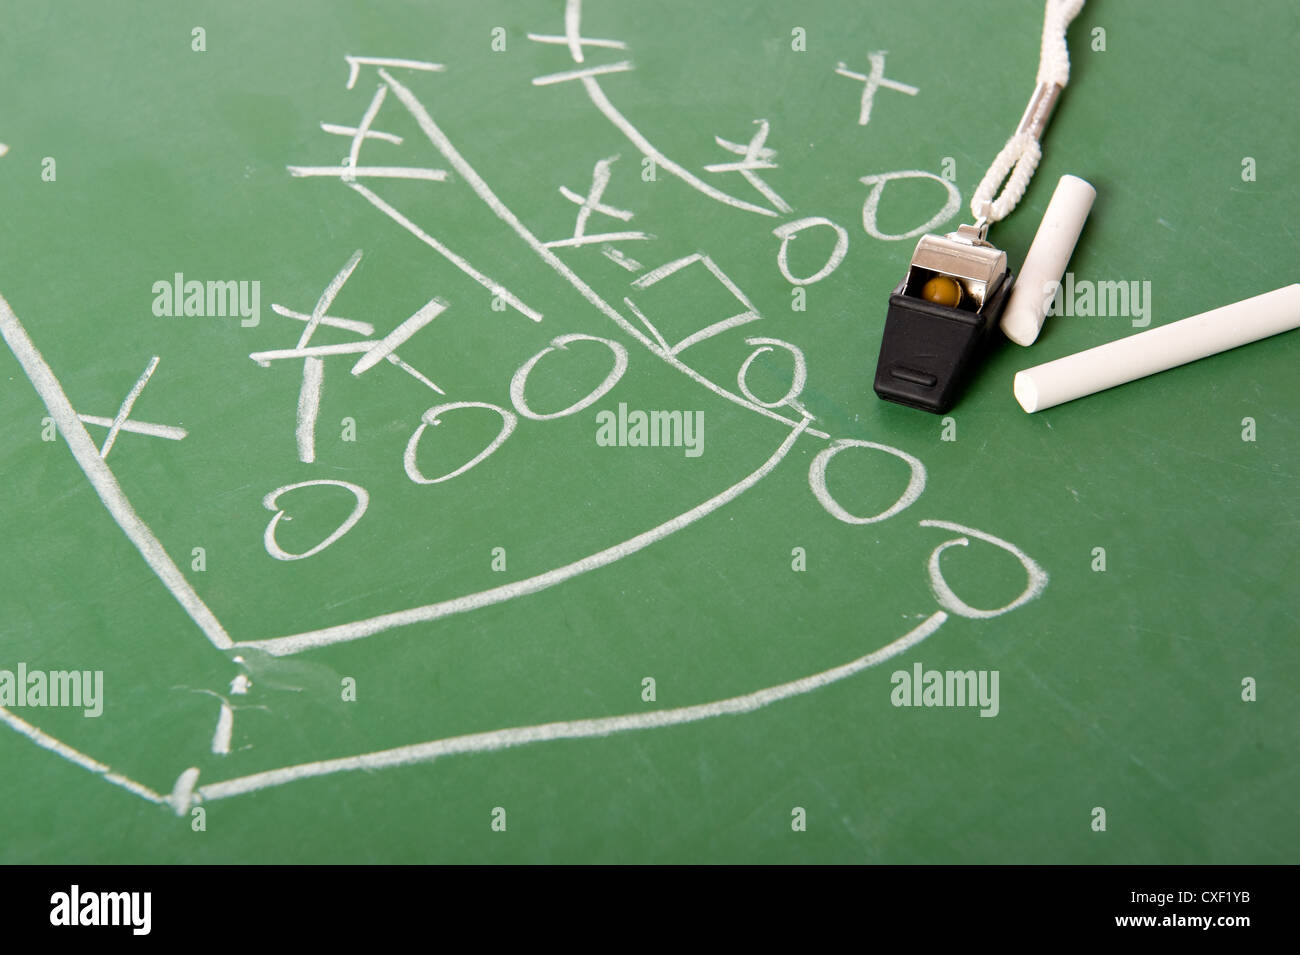 An American football play diagrammed on a green chalkboard Stock Photo